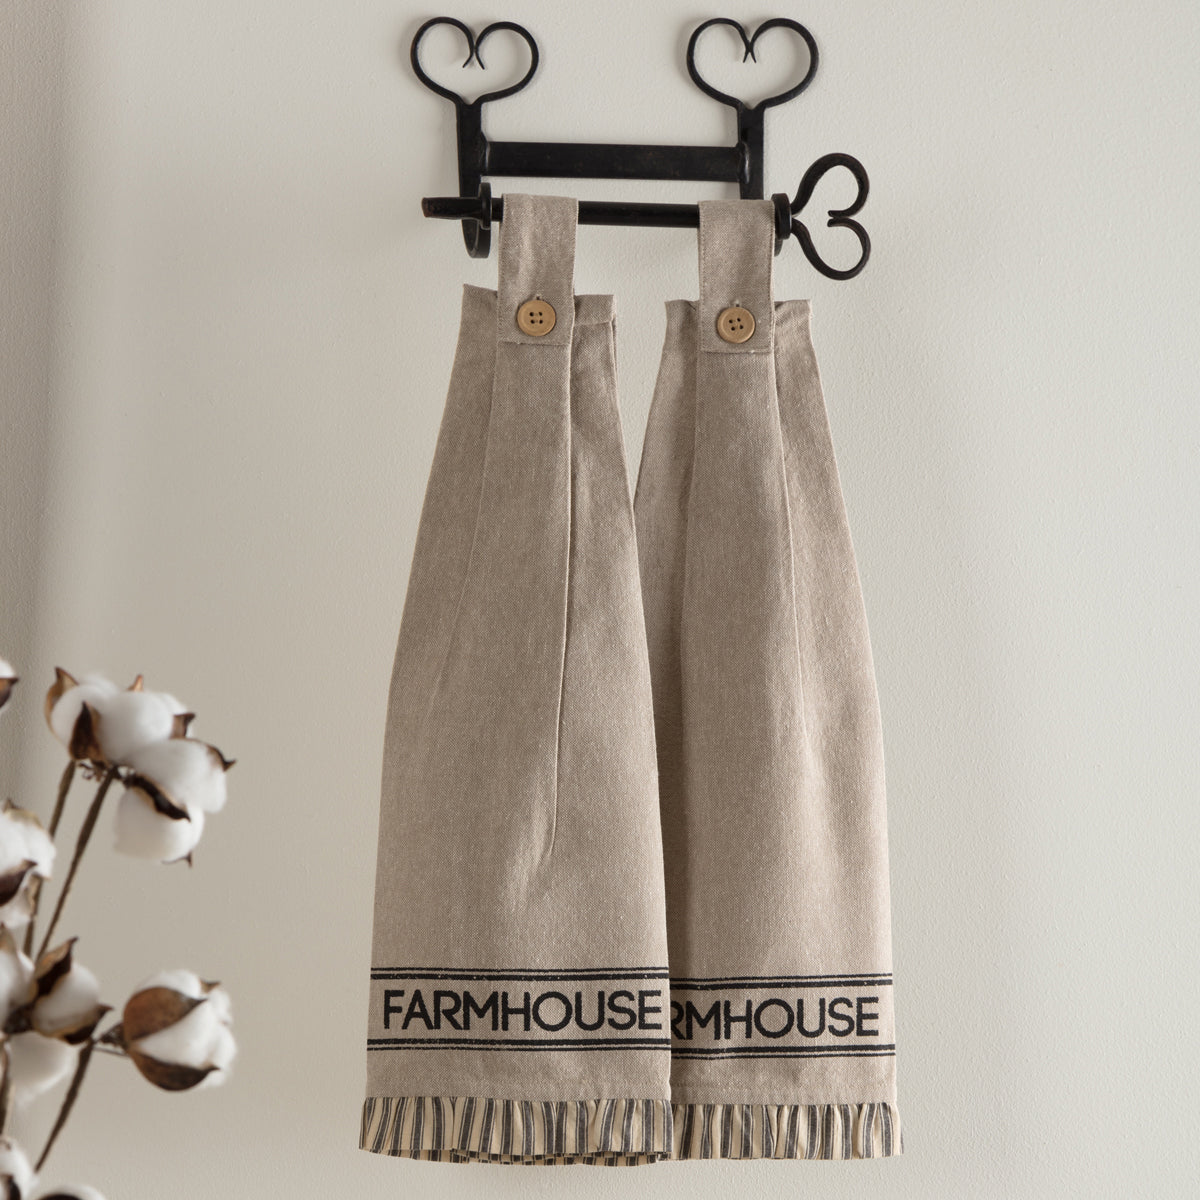 http://vhcbrands.com/cdn/shop/products/45880-Sawyer-Mill-Charcoal-Farmhouse-Button-Loop-Kitchen-Towel-Set-of-2-detailed-image-3.jpg?v=1670976206